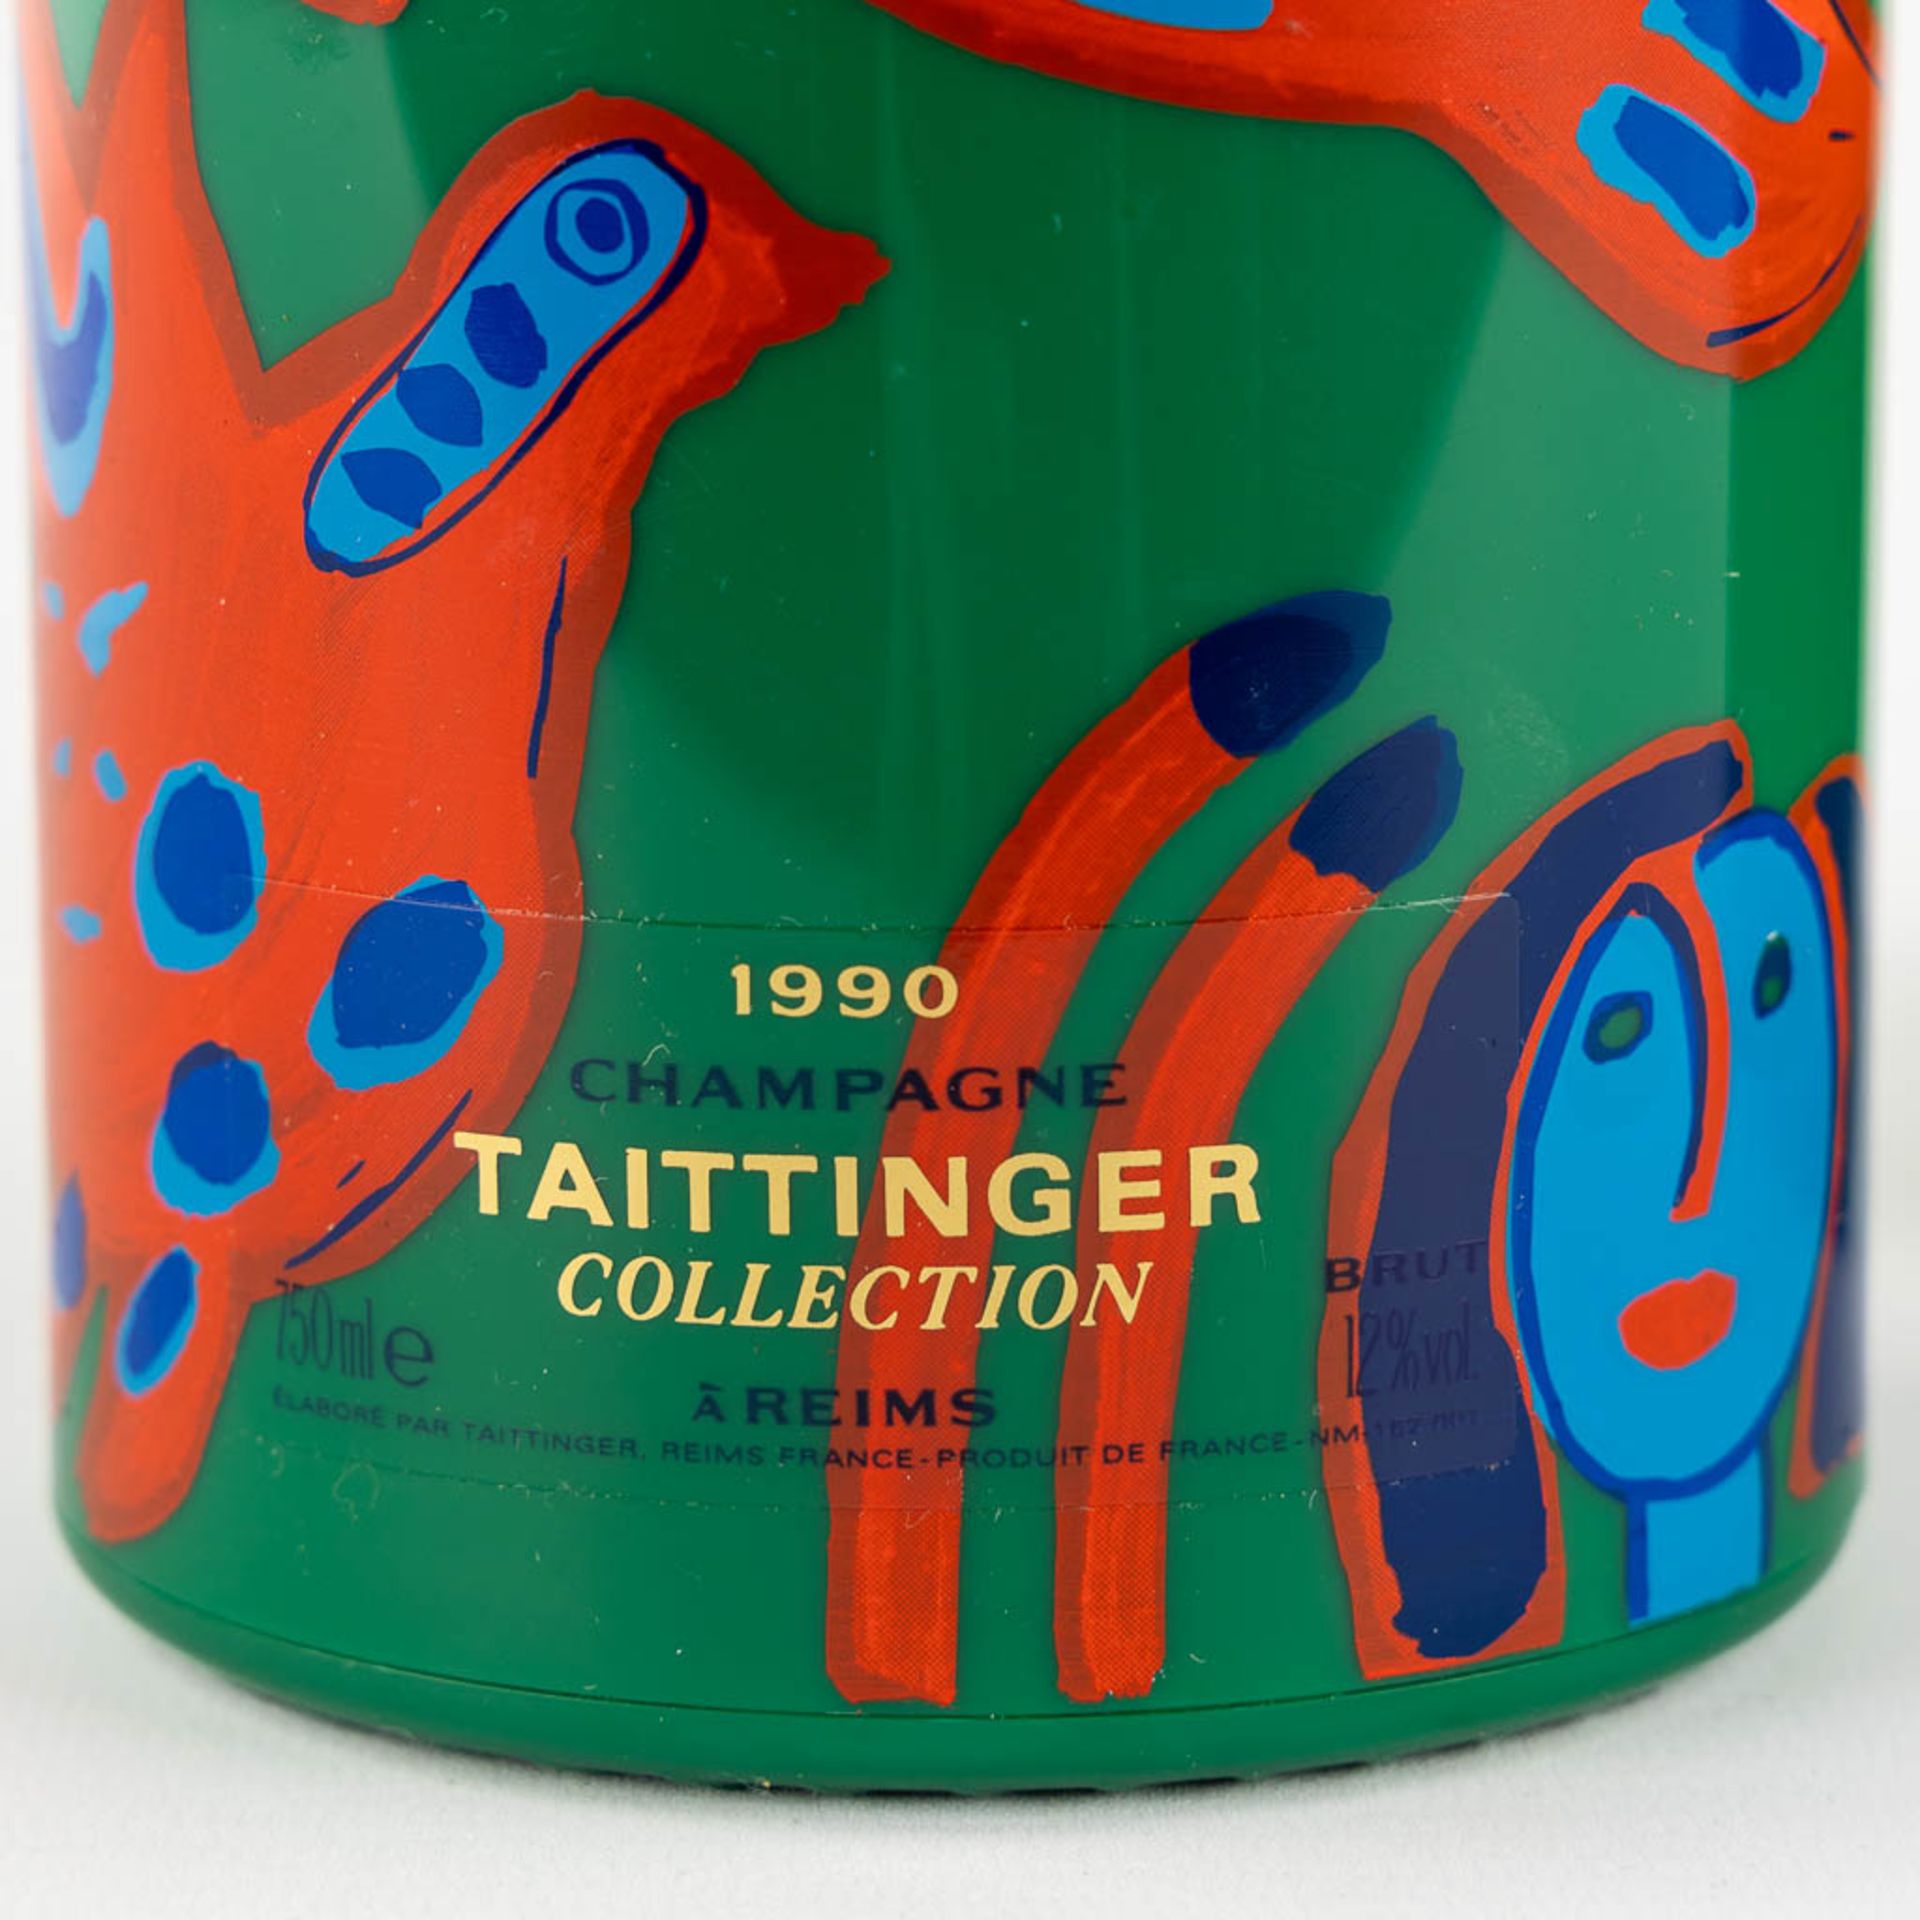 1990 Taittinger Collection Corneille, Champagne - Image 2 of 3